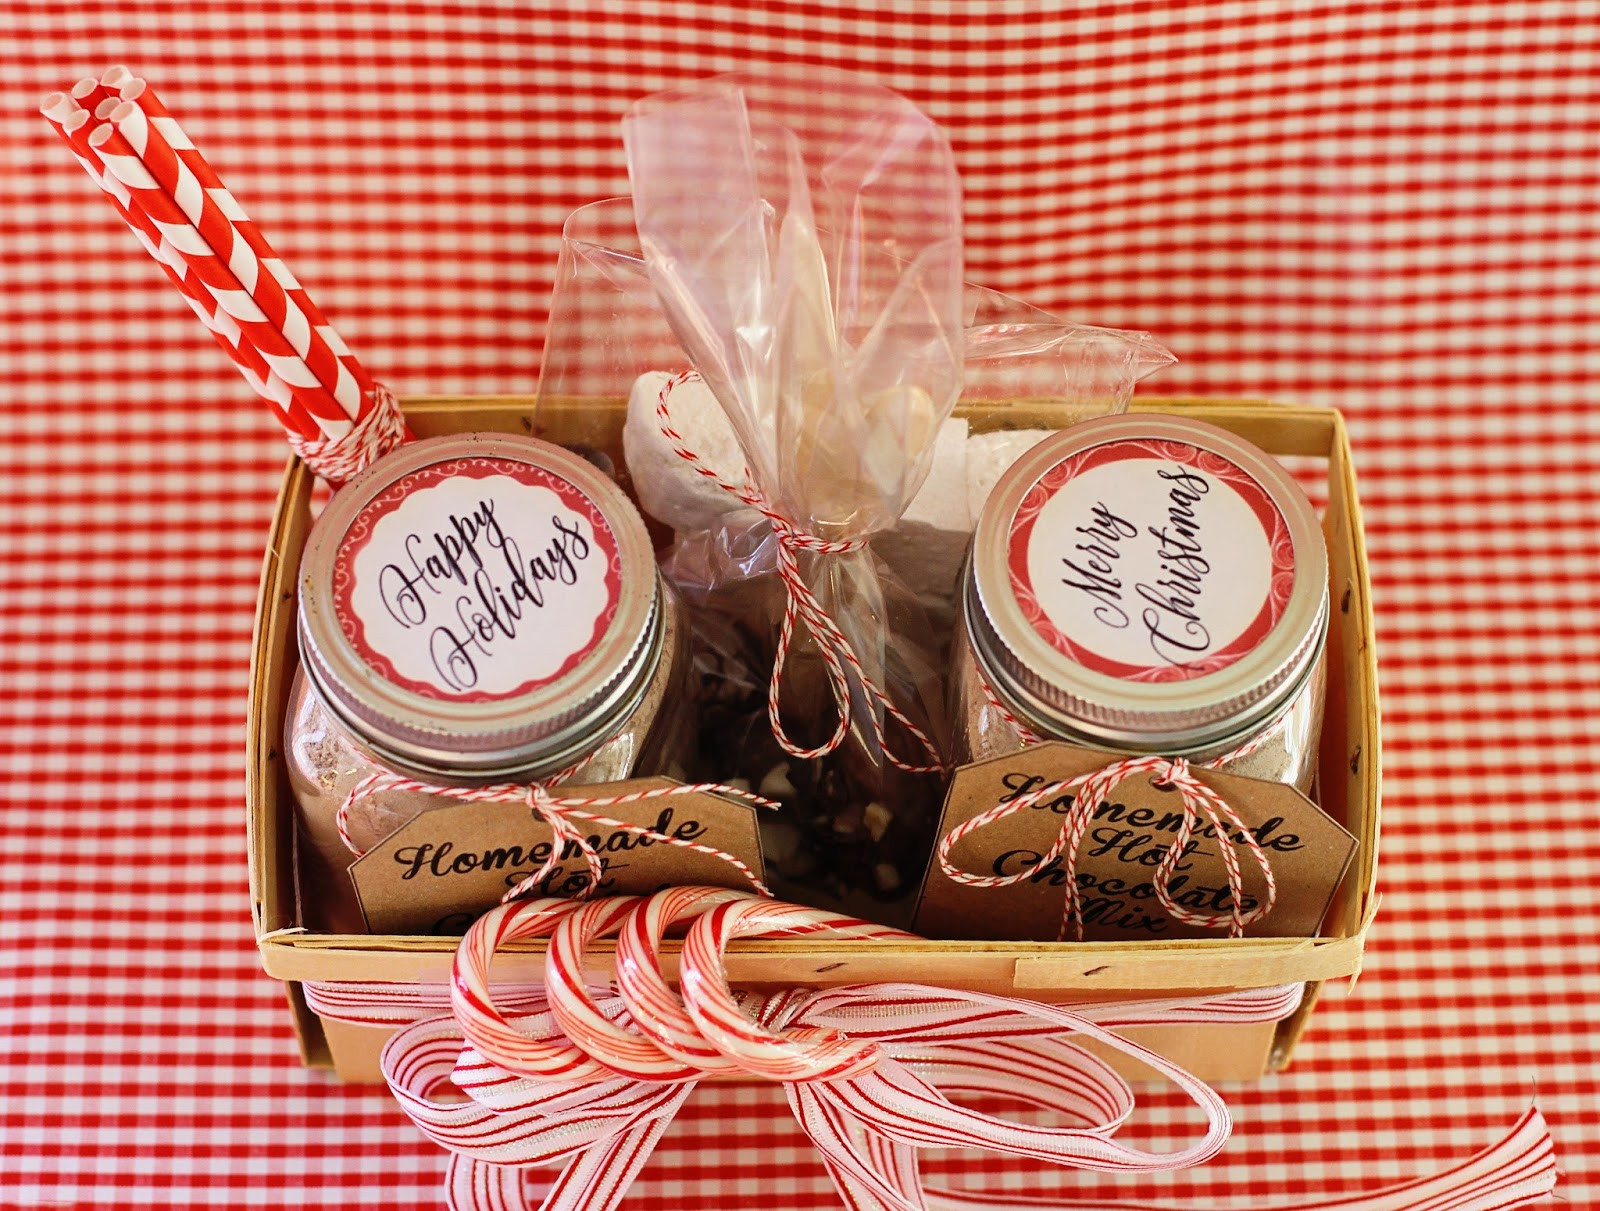 Hot Chocolate Gift Basket Ideas
 Running from the Law DIY Homemade Hot Chocolate Gift Basket